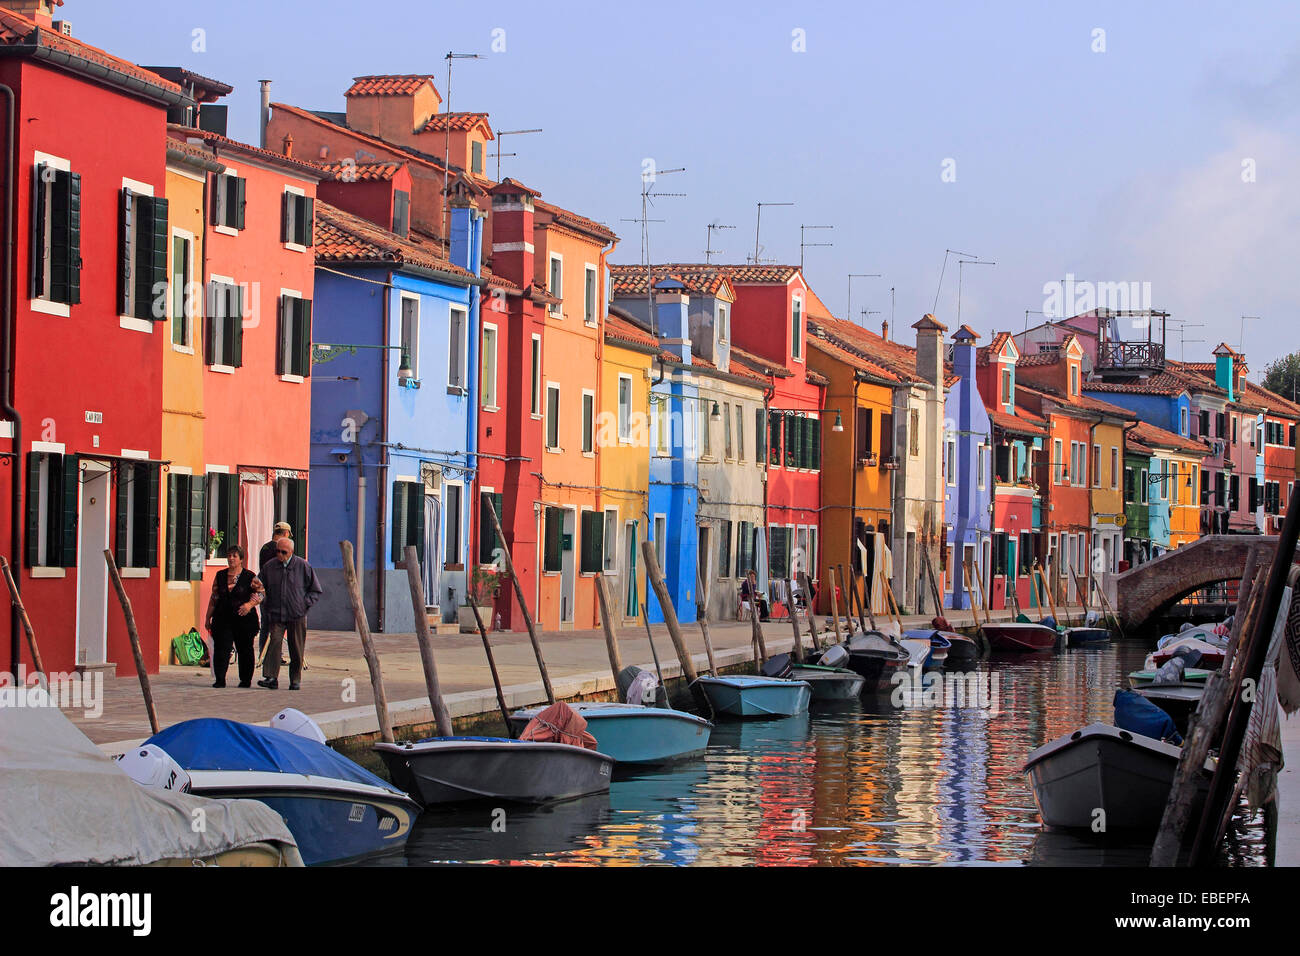 Venice Italy Burano reflections colorful houses along island canals Stock Photo